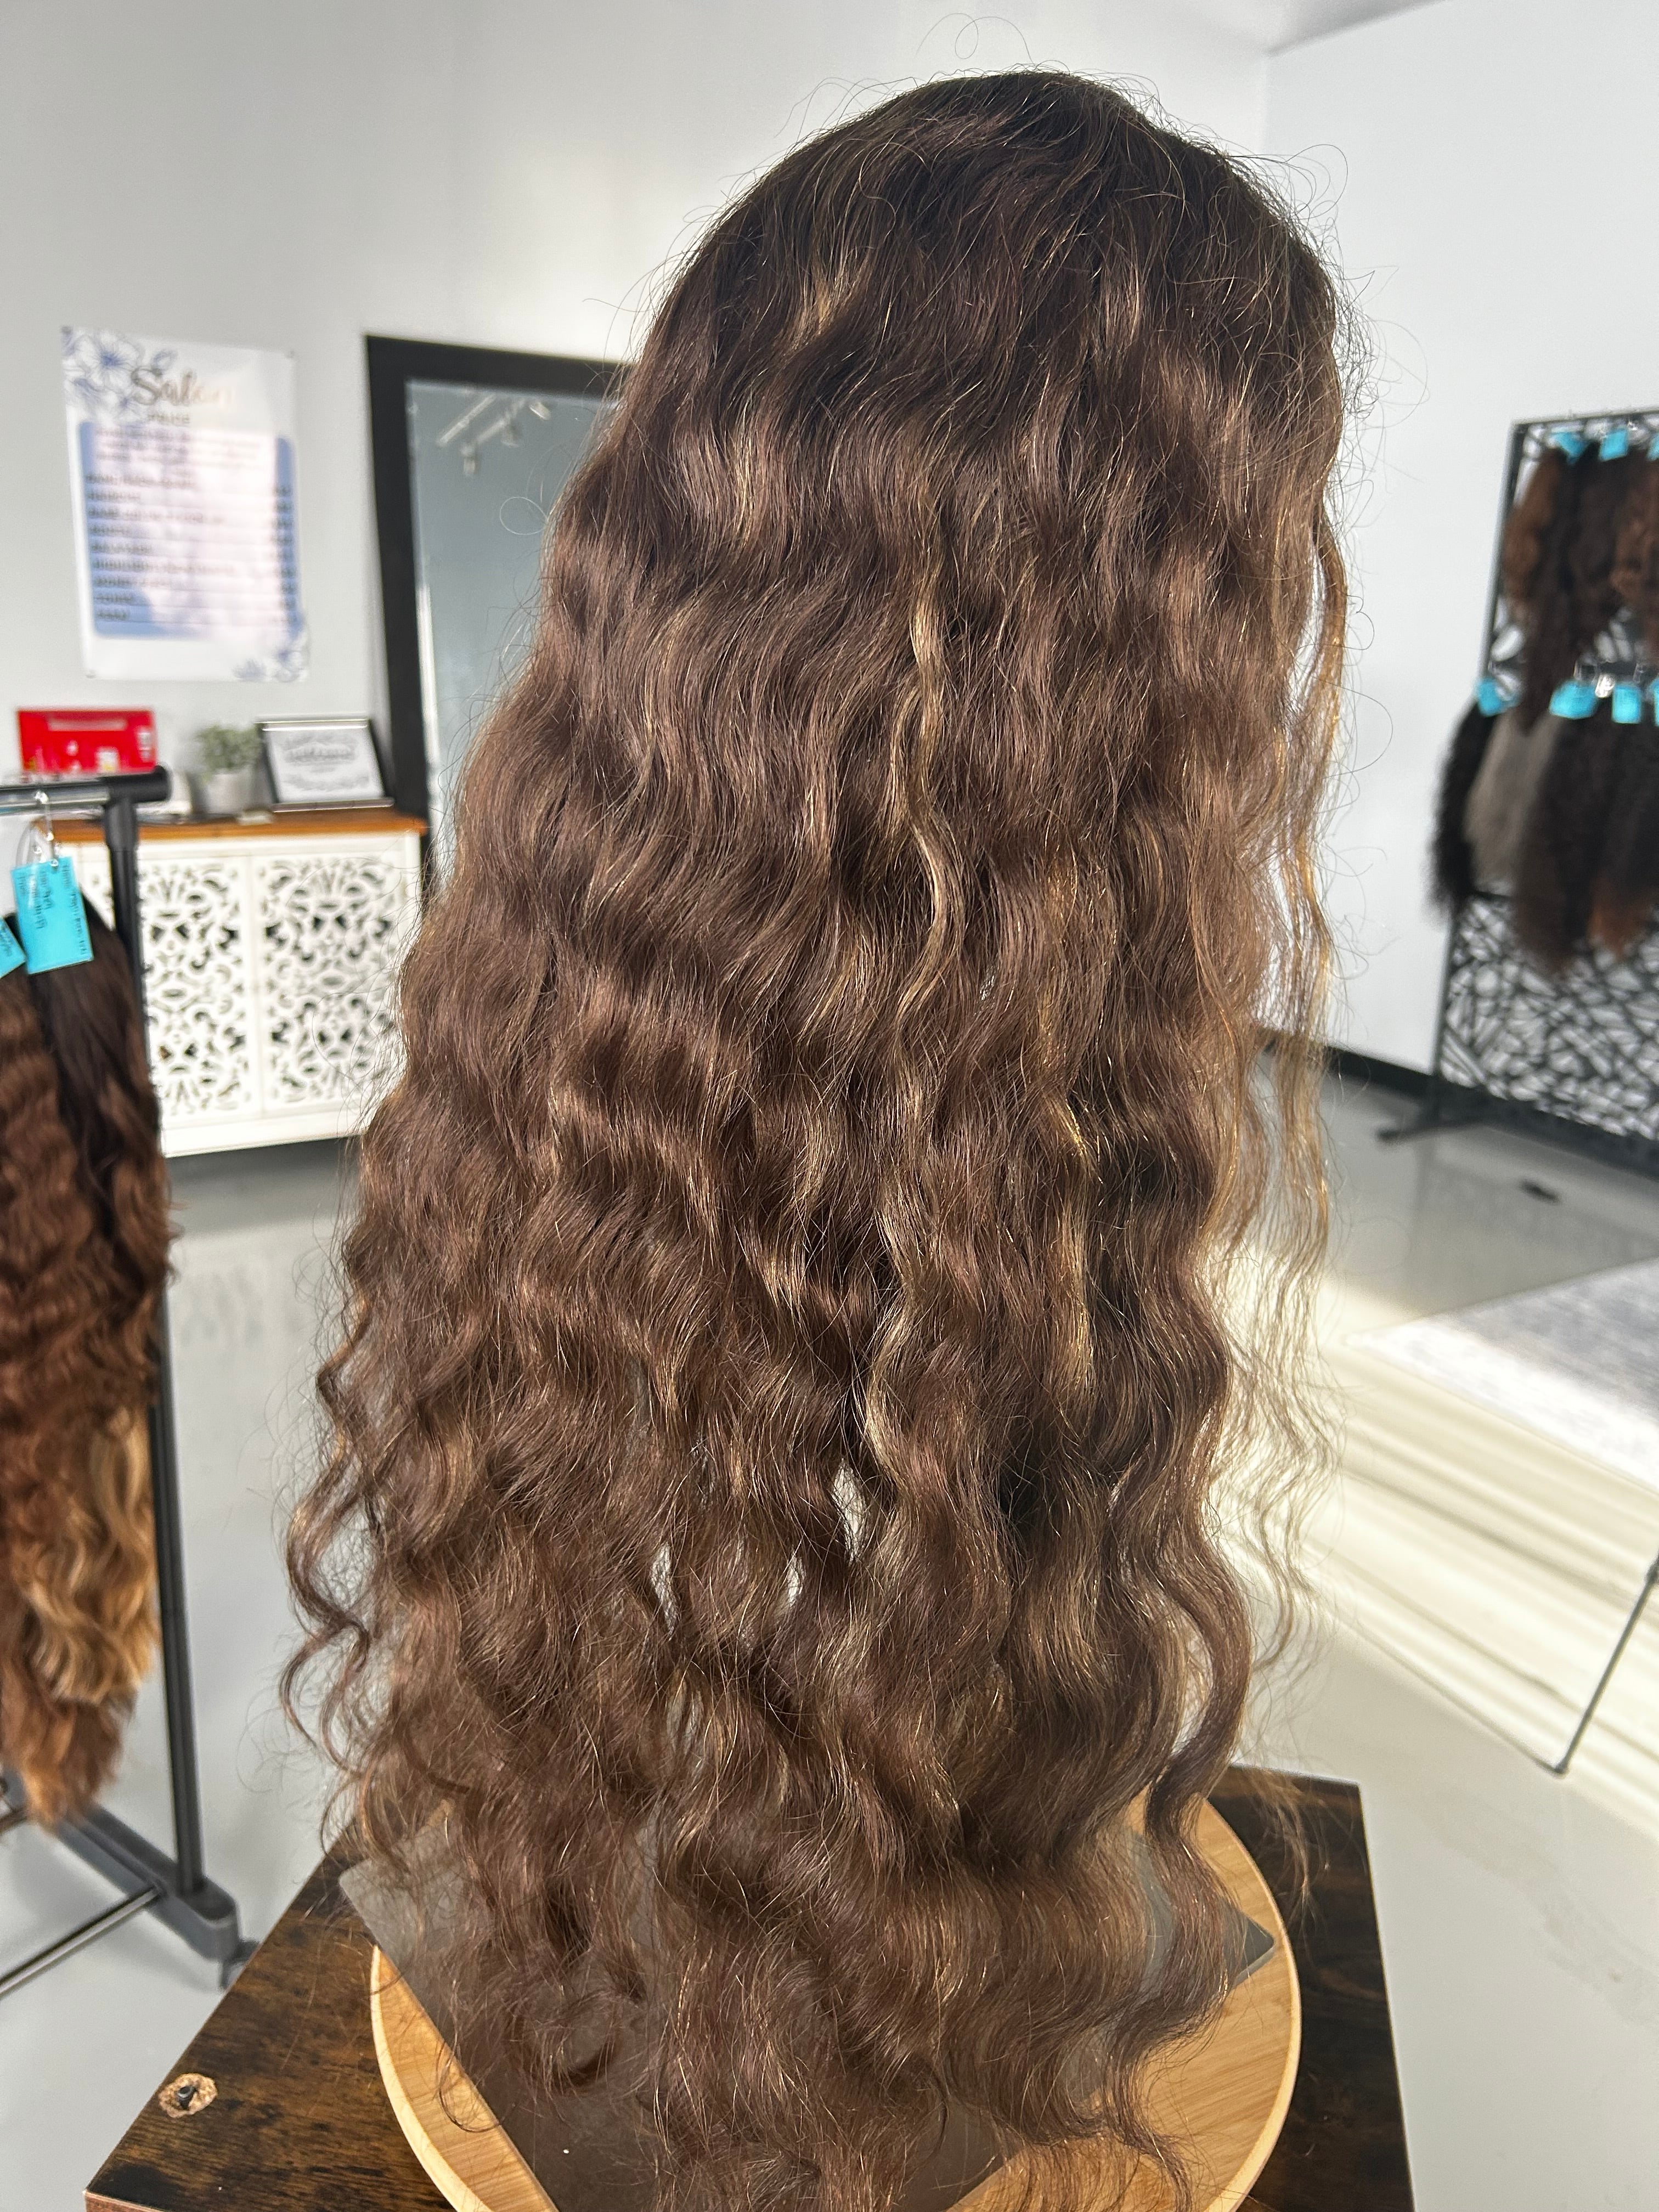 Topper - True European Curly Level 4 with Highlights, 10x10, 26-29"